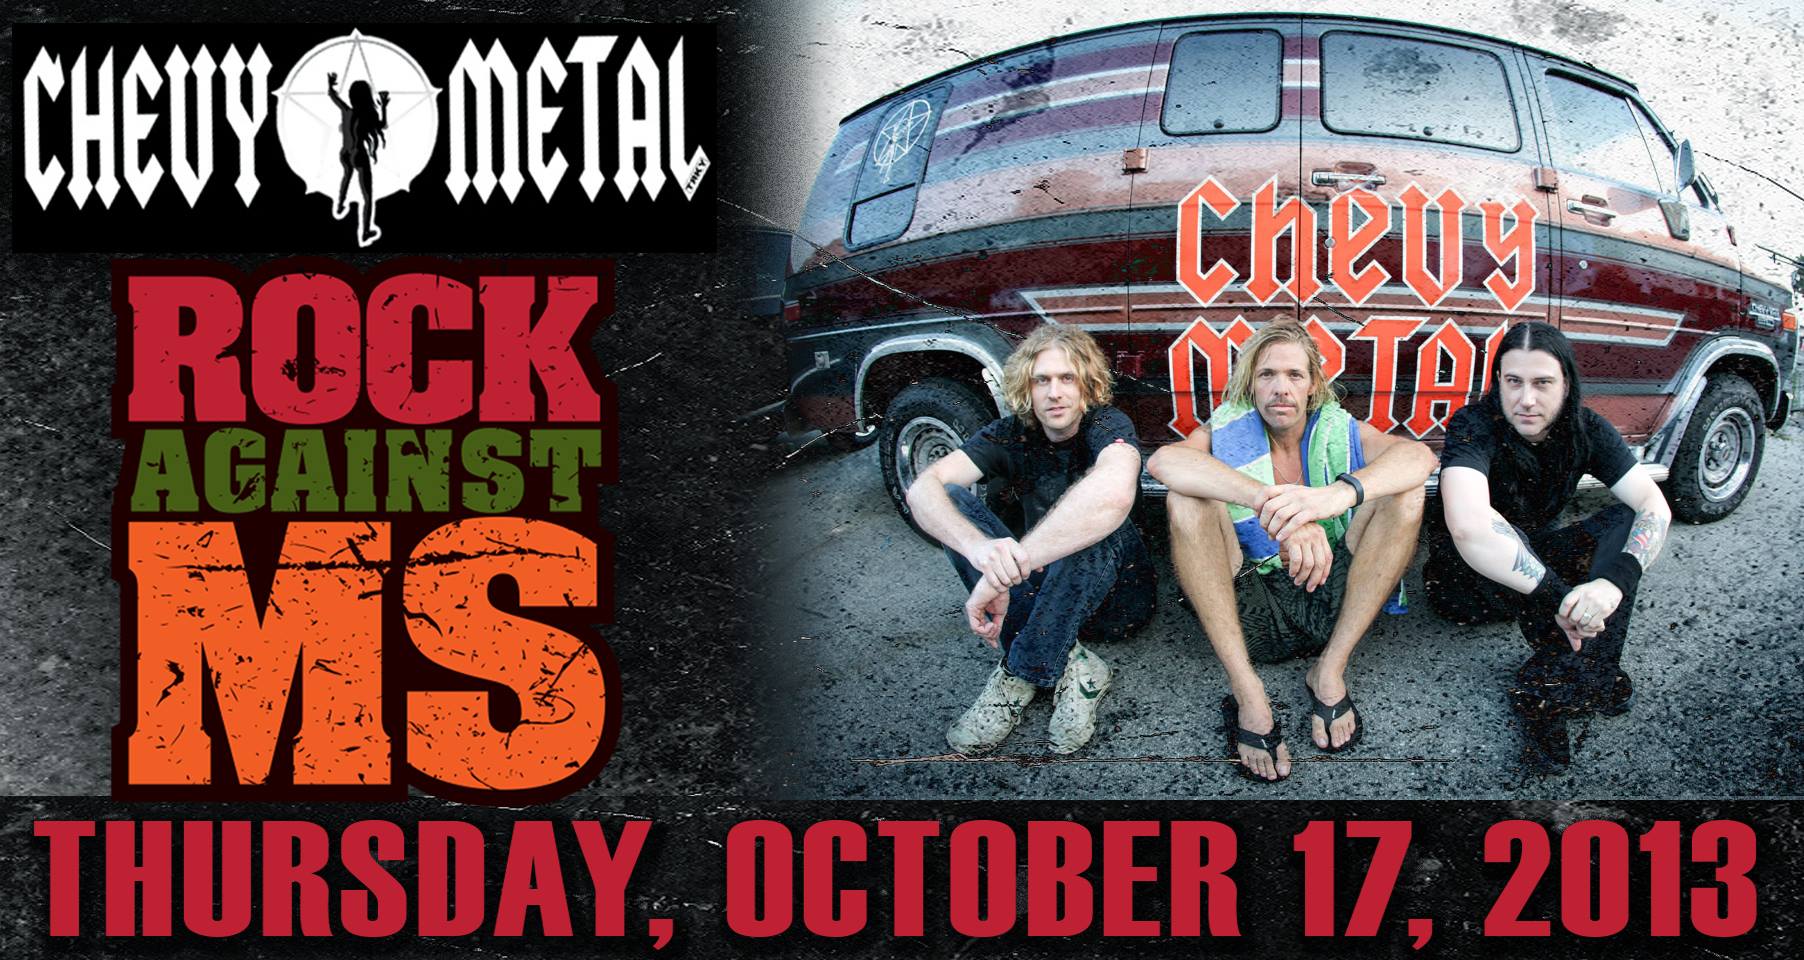 Rock Against MS Concert @ The Whisky A Go-Go in Hollywood, CA on Thursday, October 17th